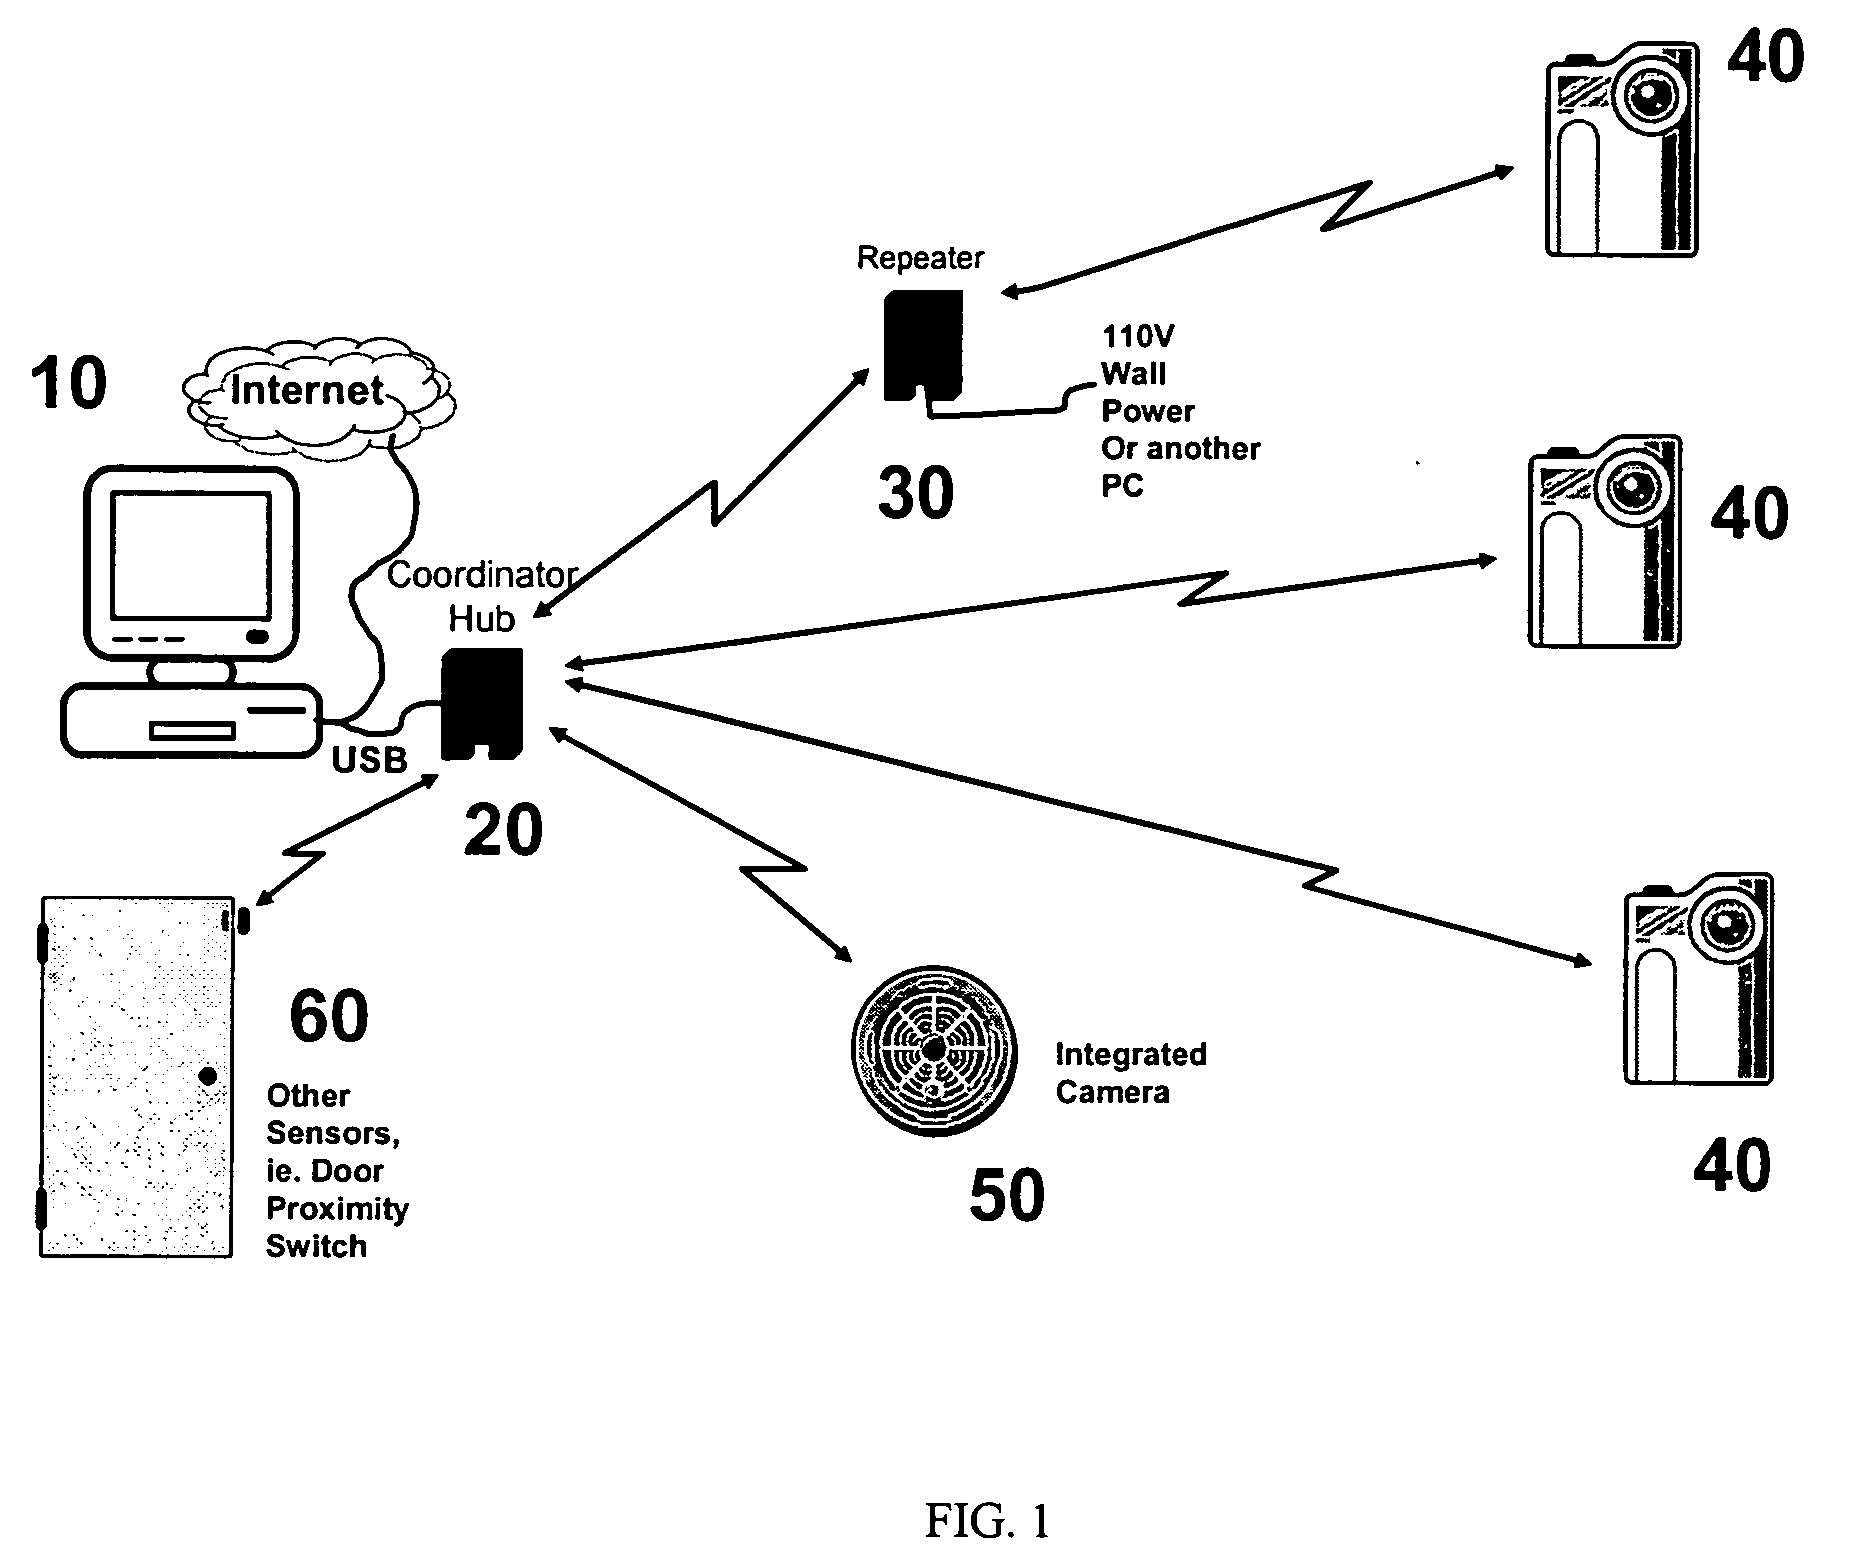 System and method for communicating over an 802.15.4 network